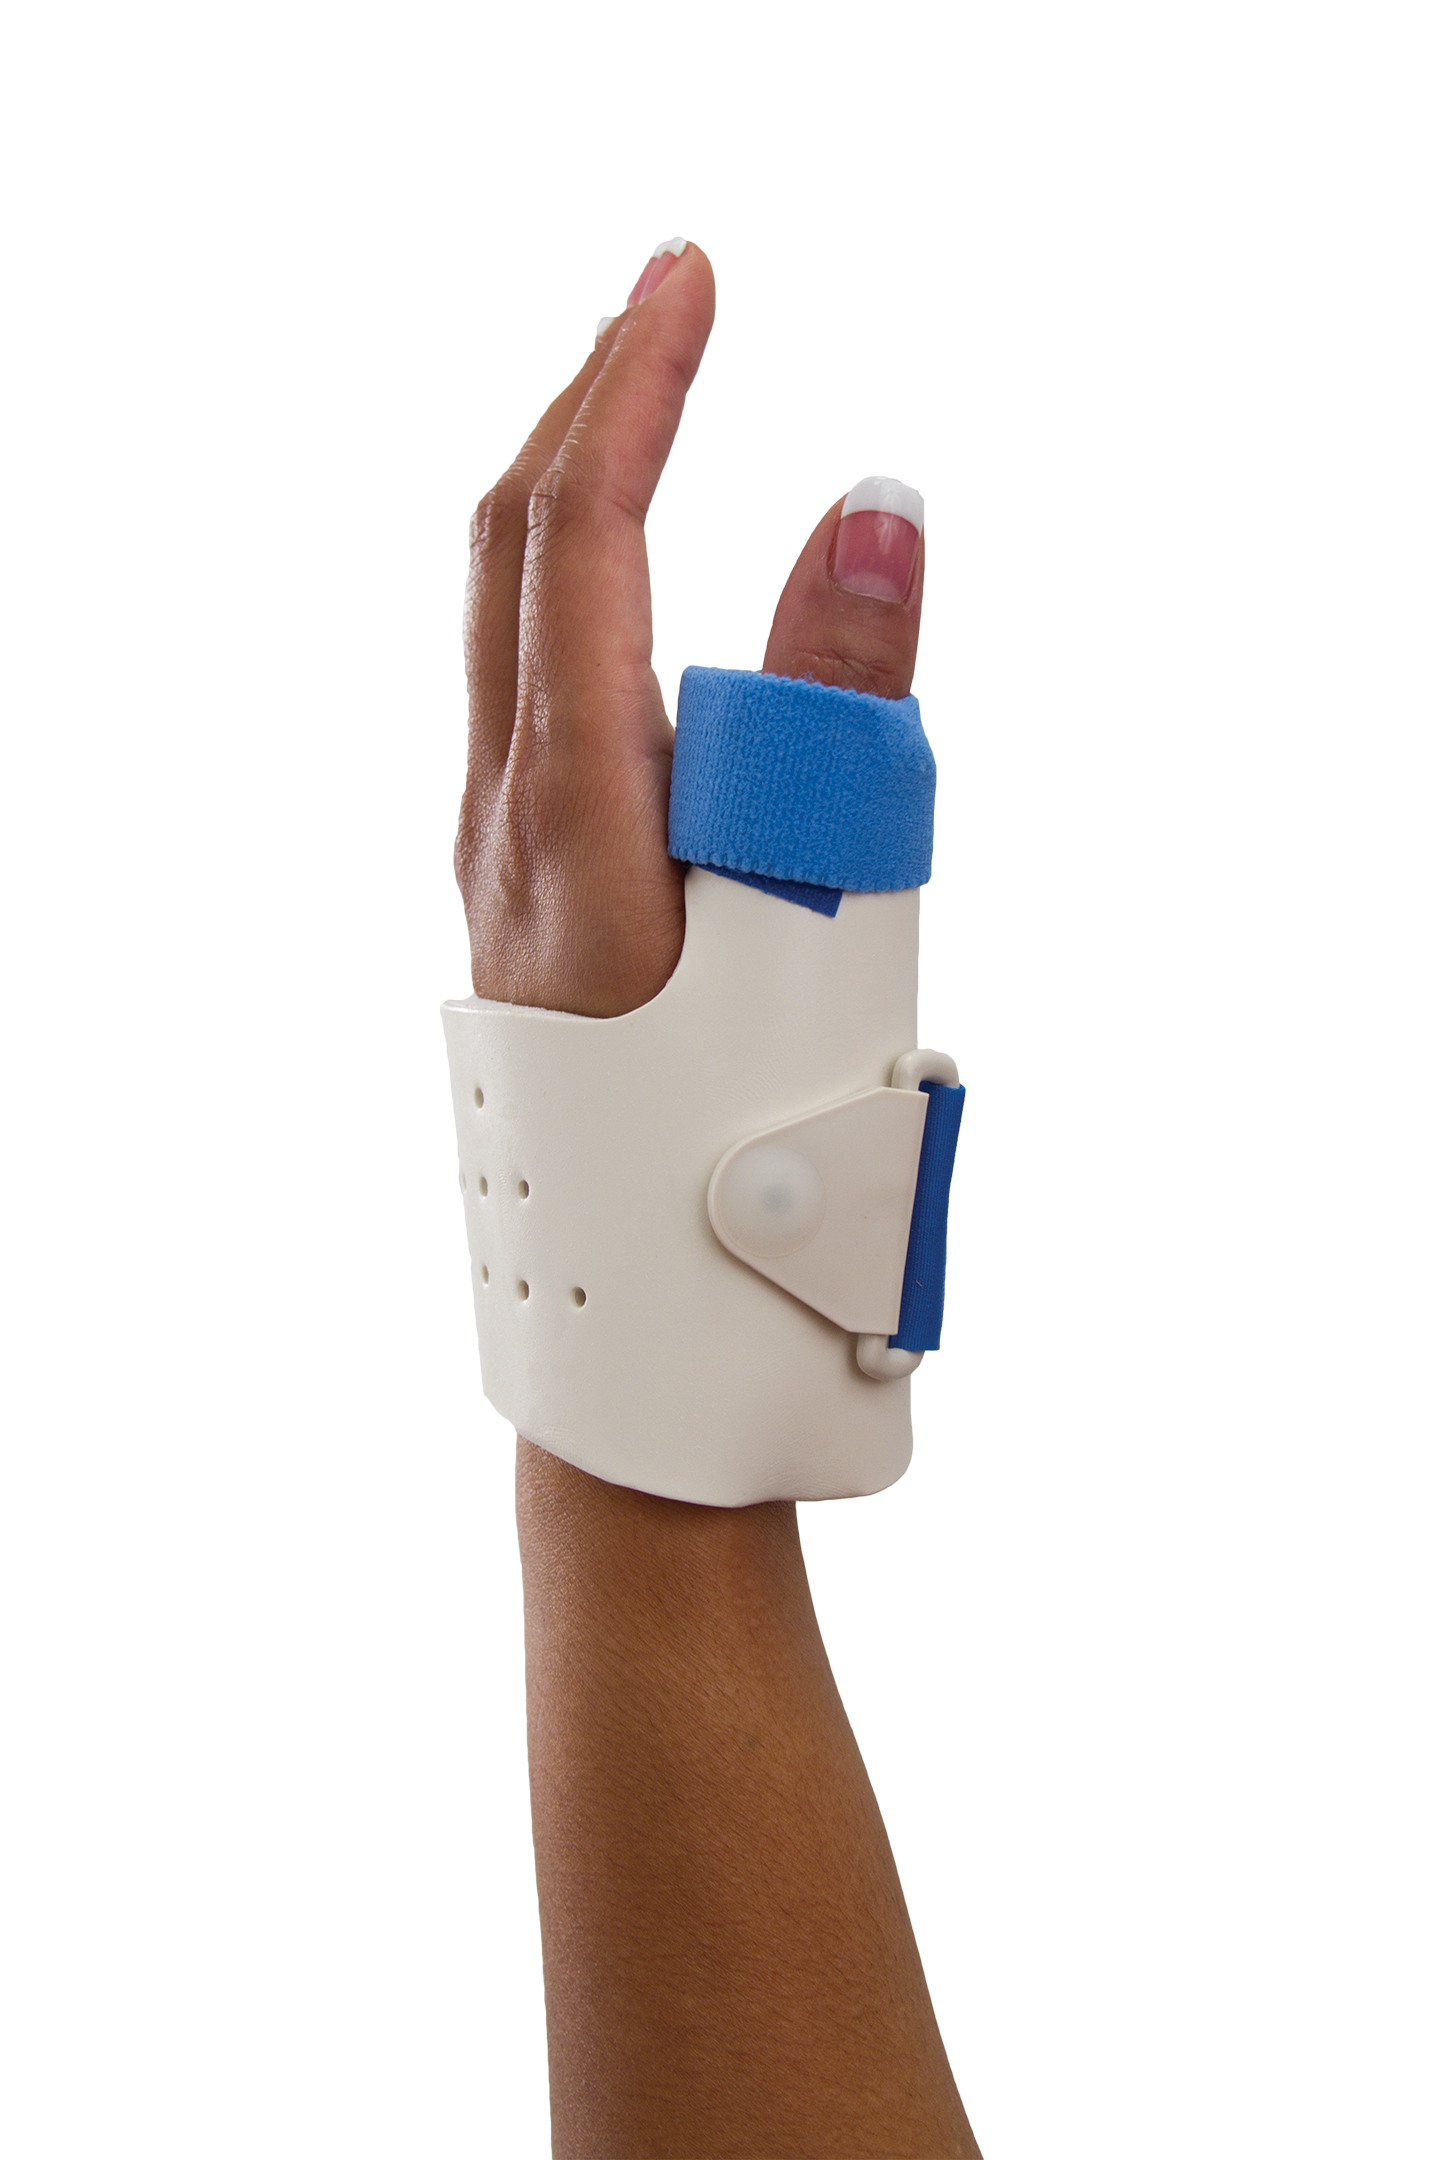 Wrist support for various types of wrist problems | NordiCare